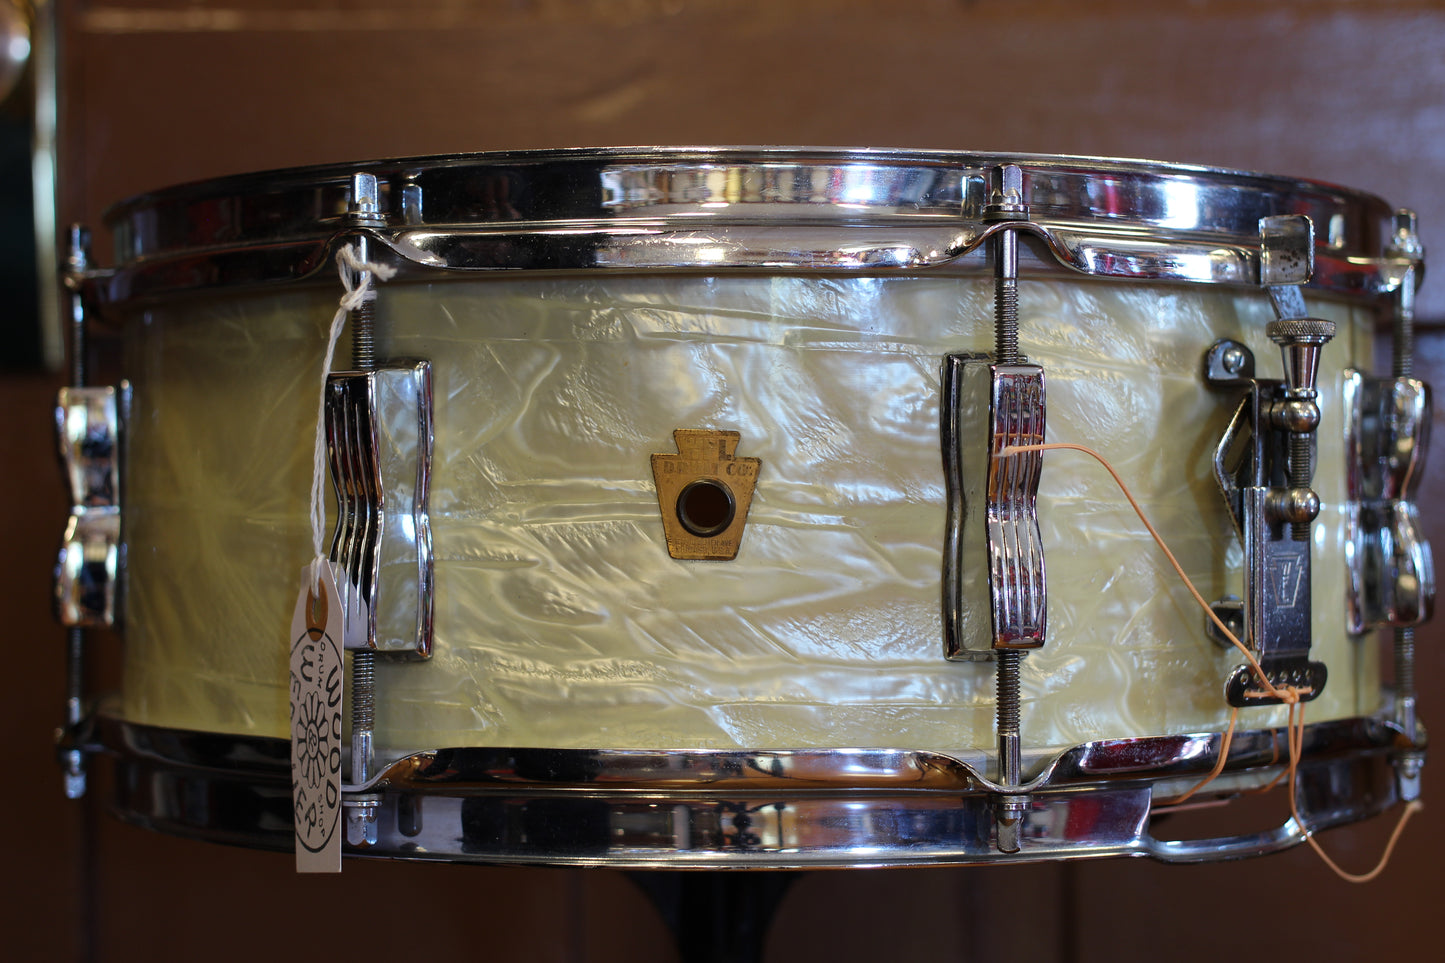 1950's WFL 5.5"x14" 'Swingster Dance Model' Snare Drum in Marine Pearl